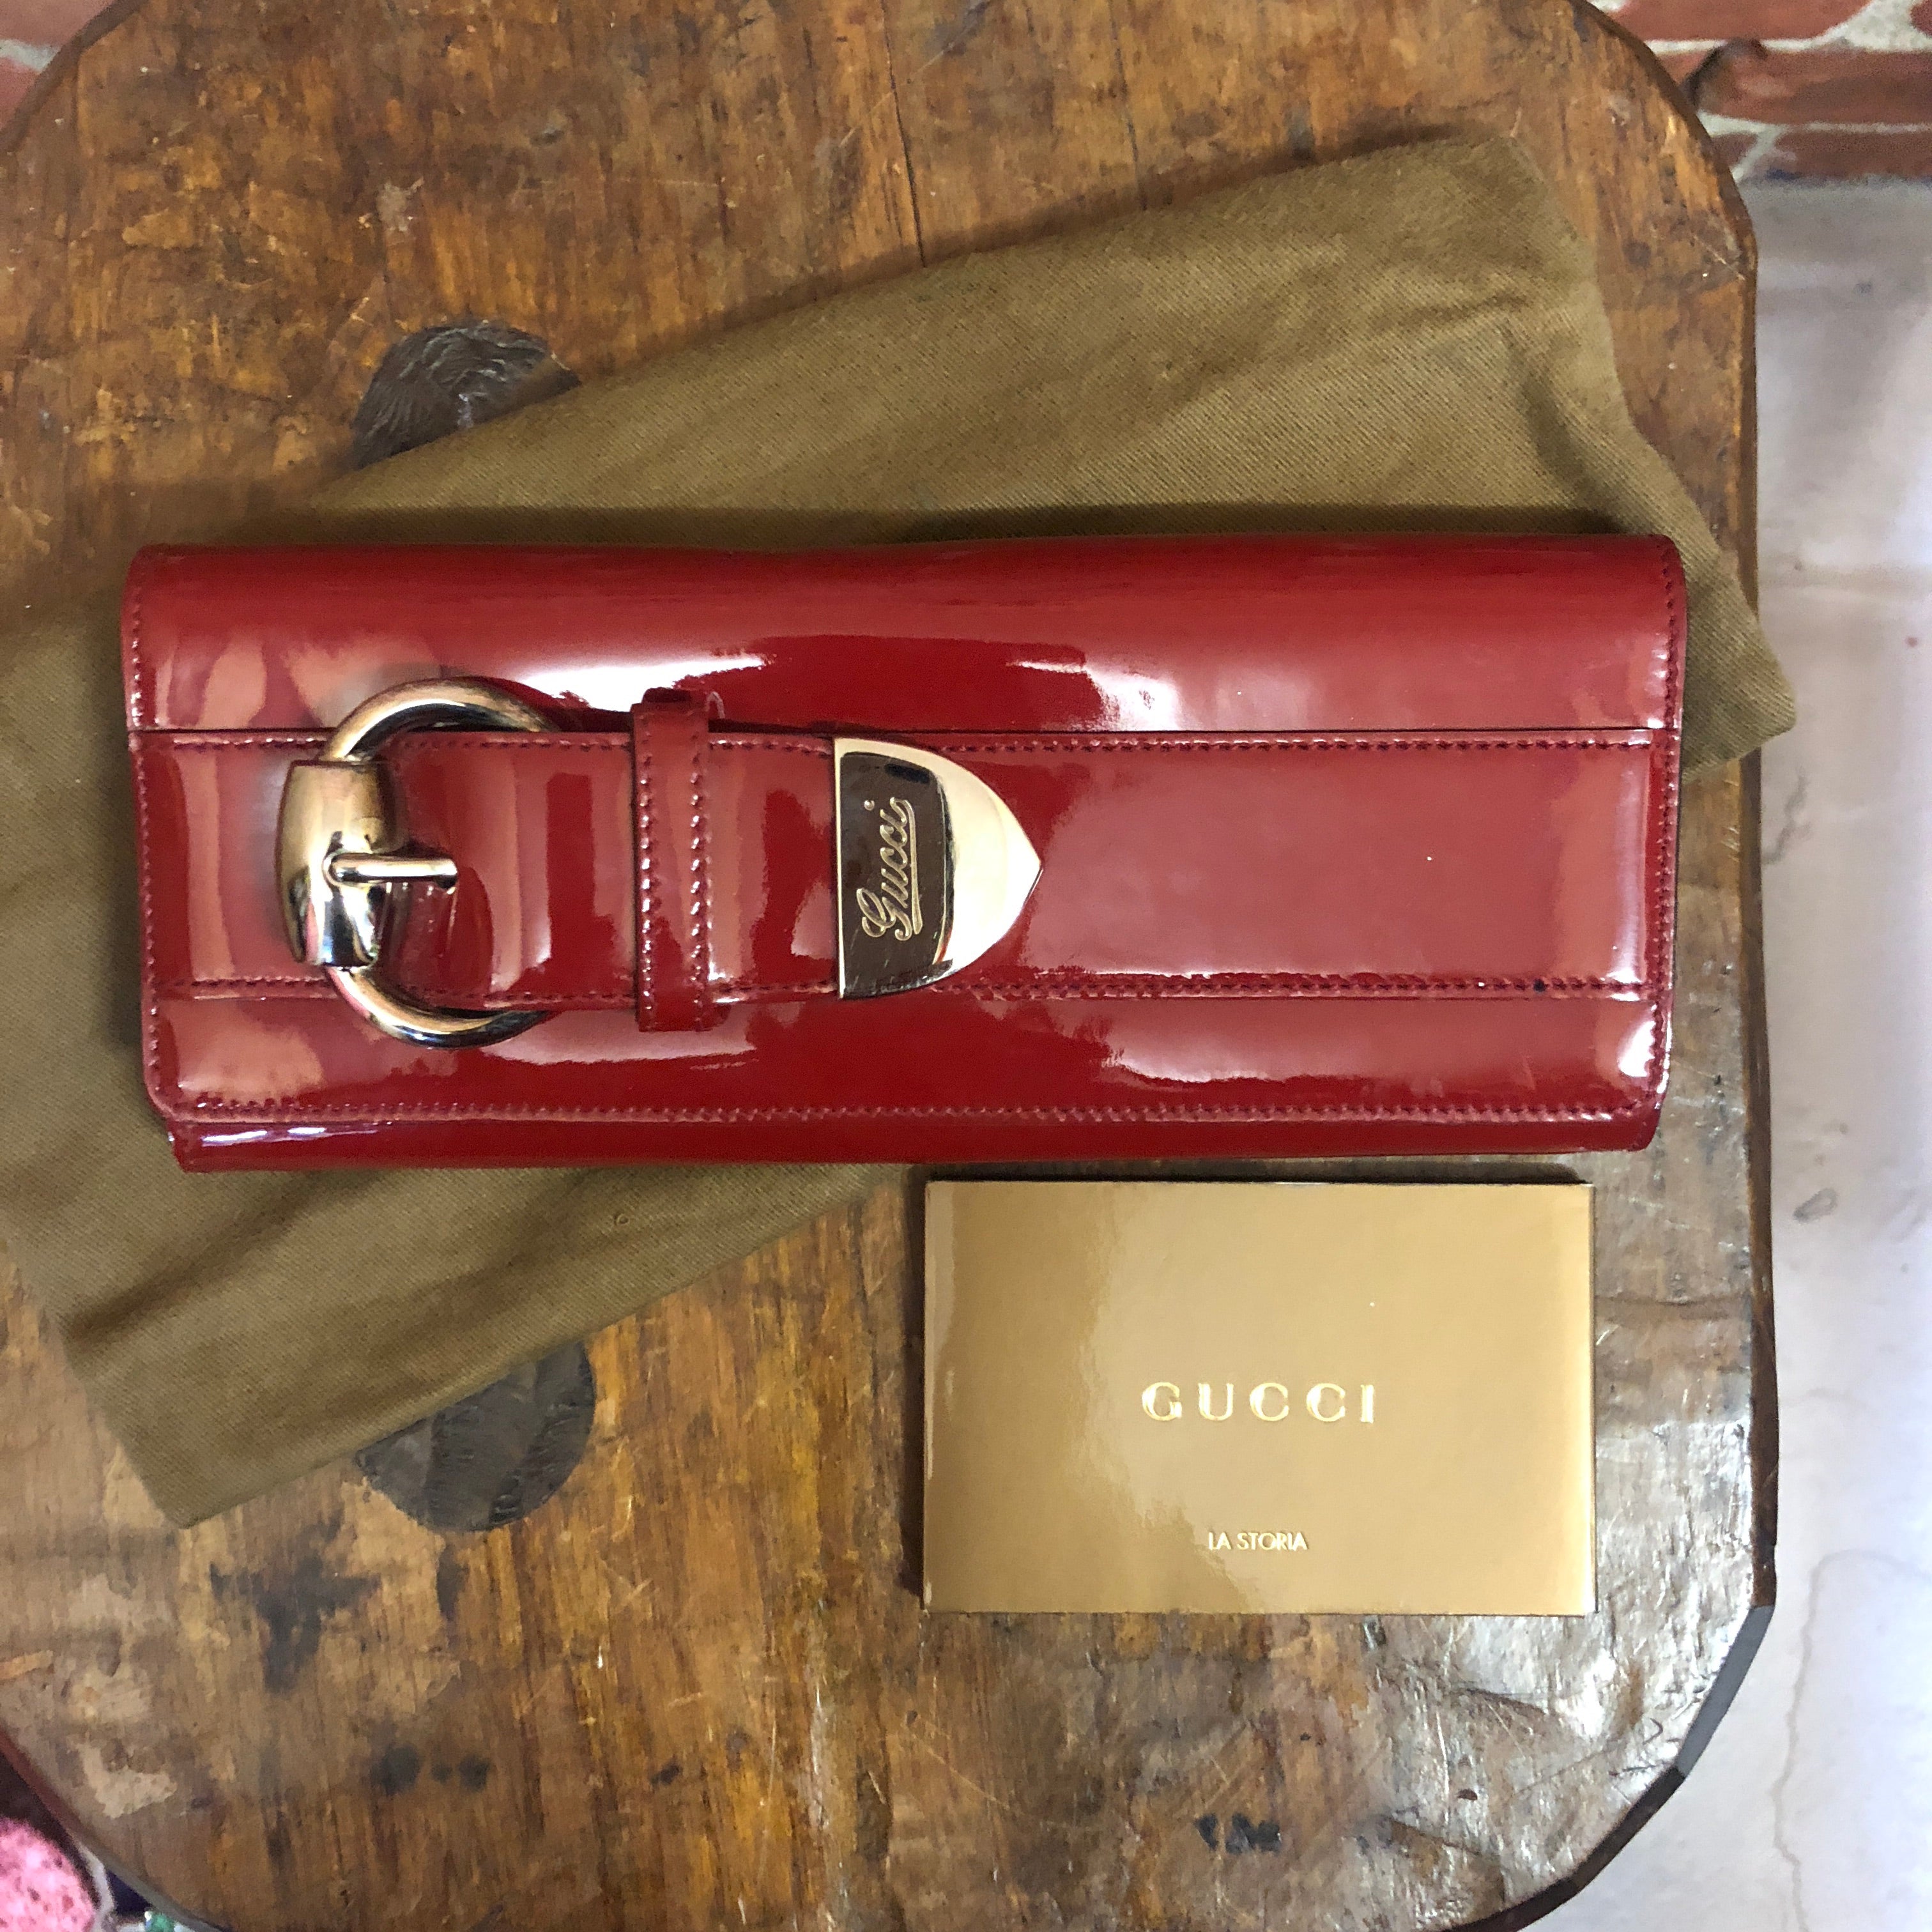 GUCCI patent leather wallet clutch